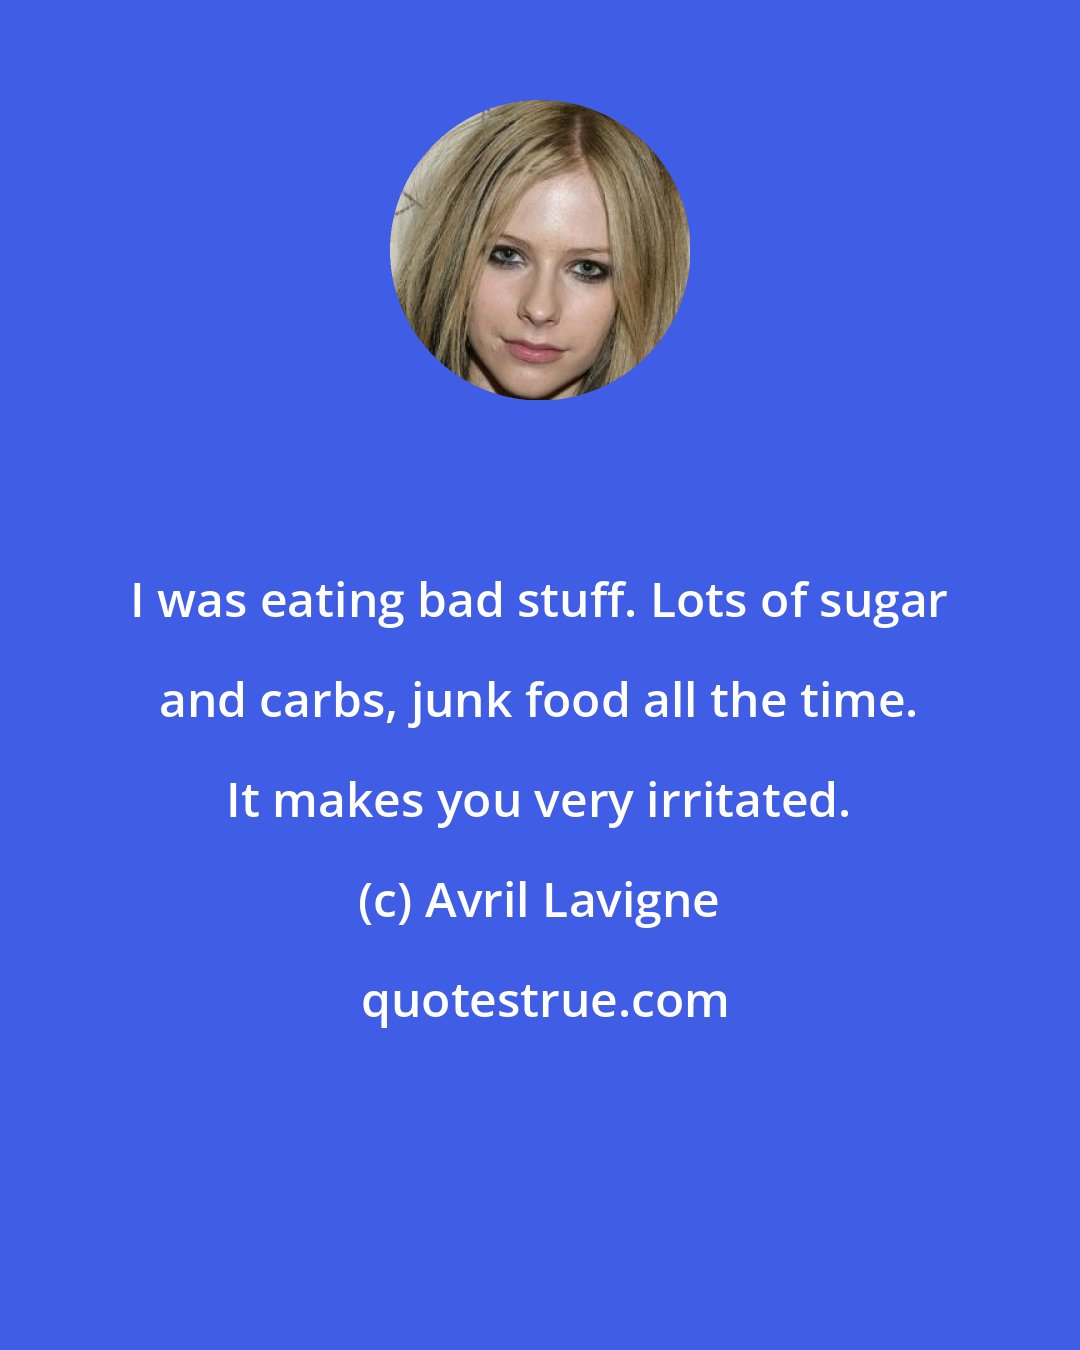 Avril Lavigne: I was eating bad stuff. Lots of sugar and carbs, junk food all the time. It makes you very irritated.